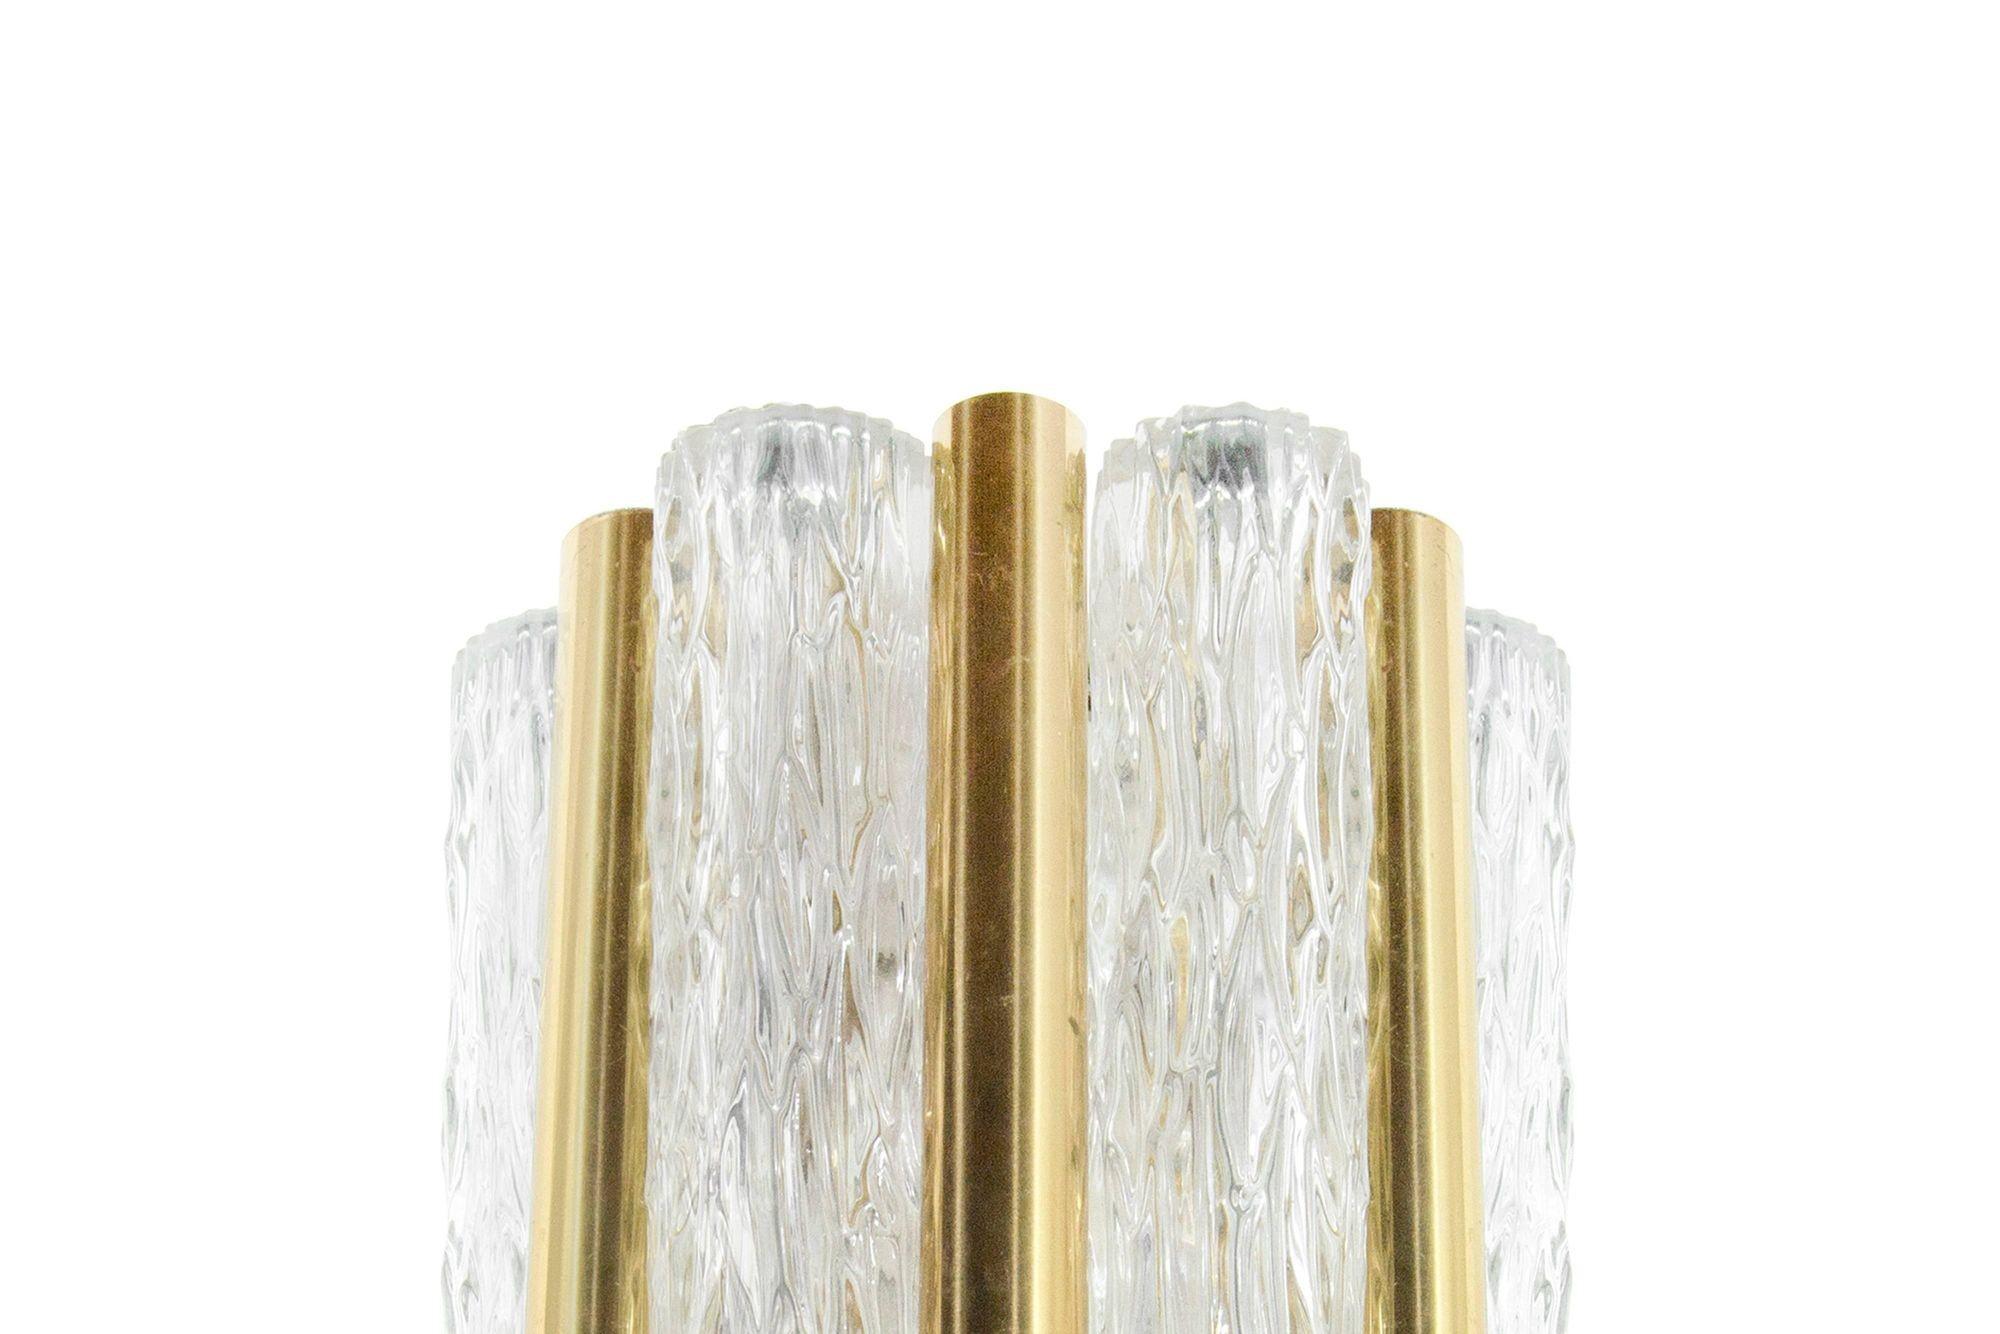 Set of Murano Glass and Brass Sconces by Doria Leuchten, Germany, C. 1960s For Sale 2